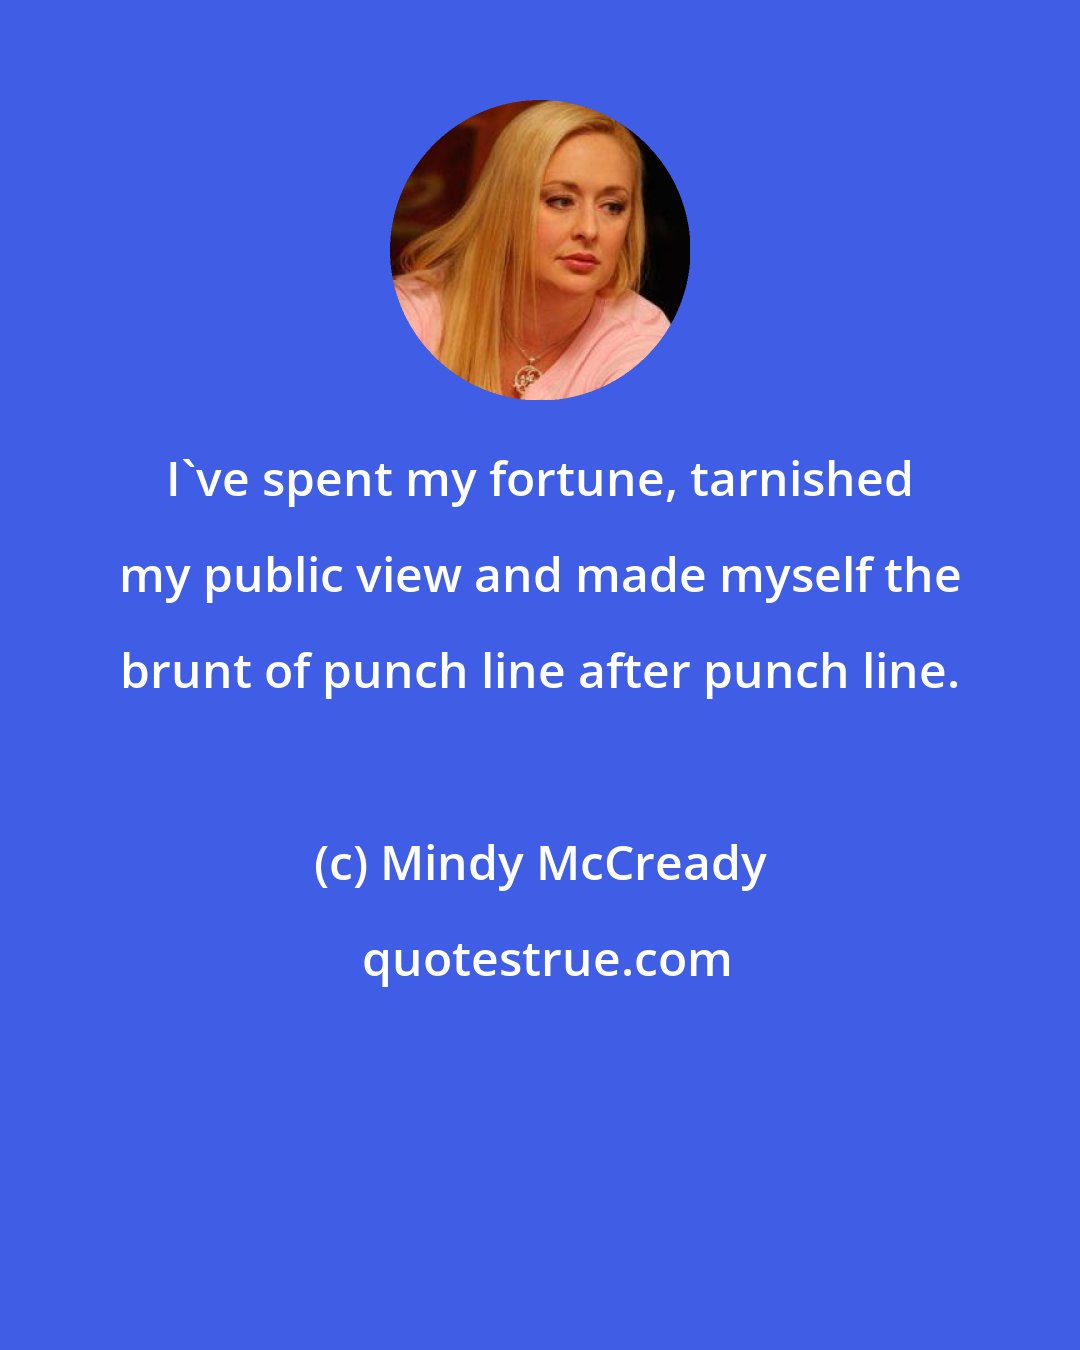 Mindy McCready: I've spent my fortune, tarnished my public view and made myself the brunt of punch line after punch line.